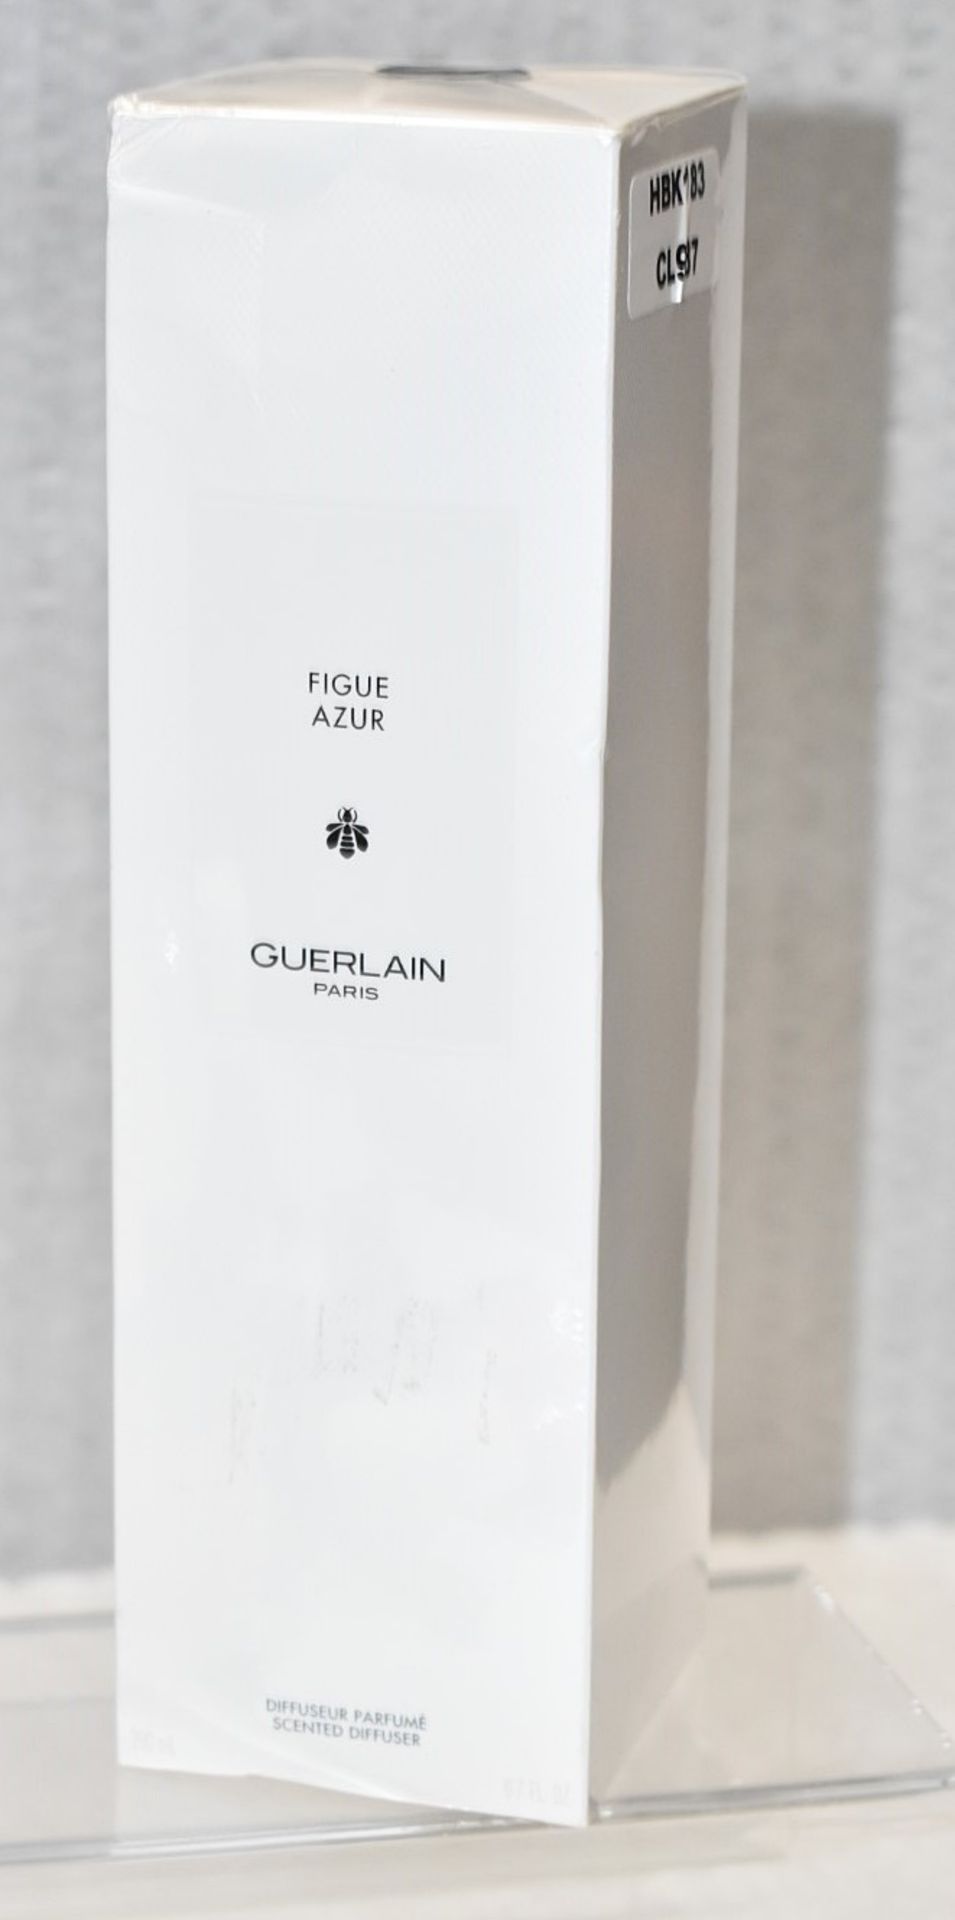 1 x GUERLAIN Figue Azur Diffuser (200ml) - Original £102.00 - Sealed / Boxed Stock - Made In France - Image 2 of 5